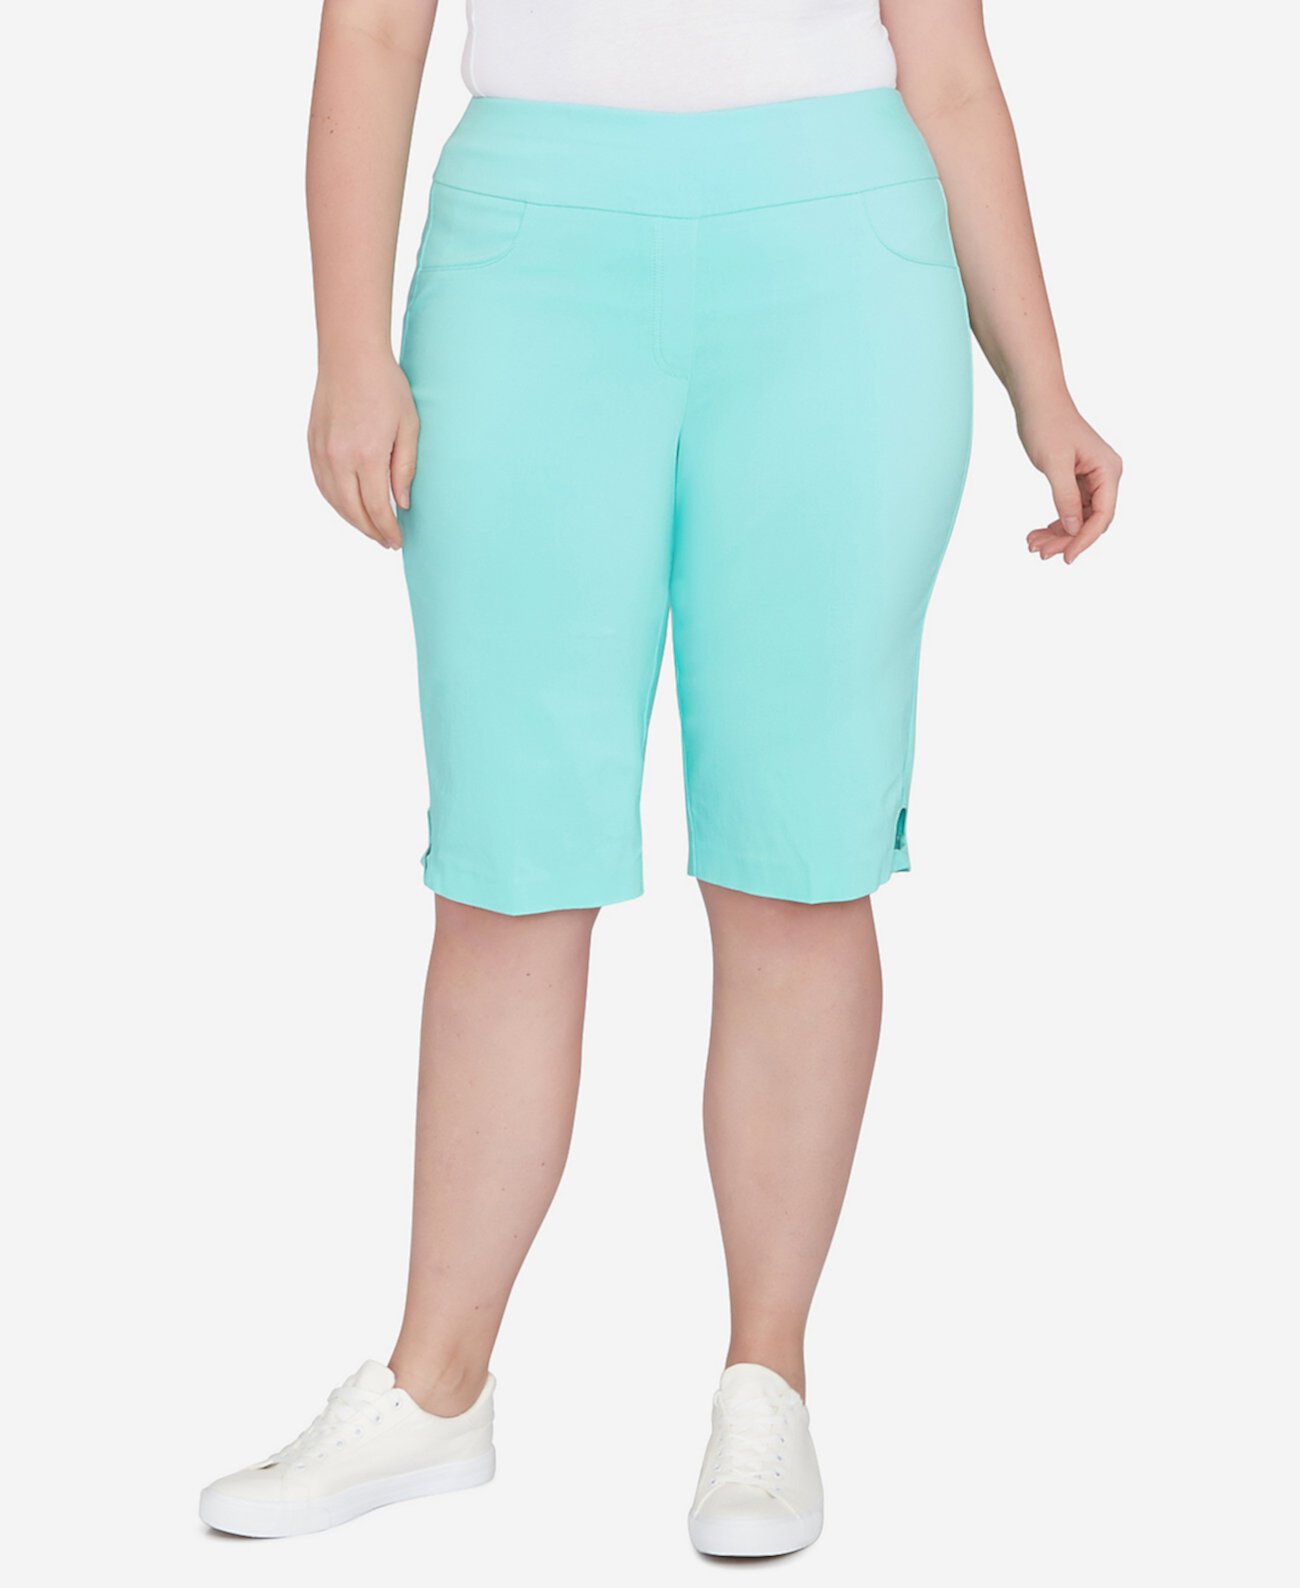 Plus Size Spring Into Action Solid Tech Stretch Skimmer Pant HEARTS OF PALM